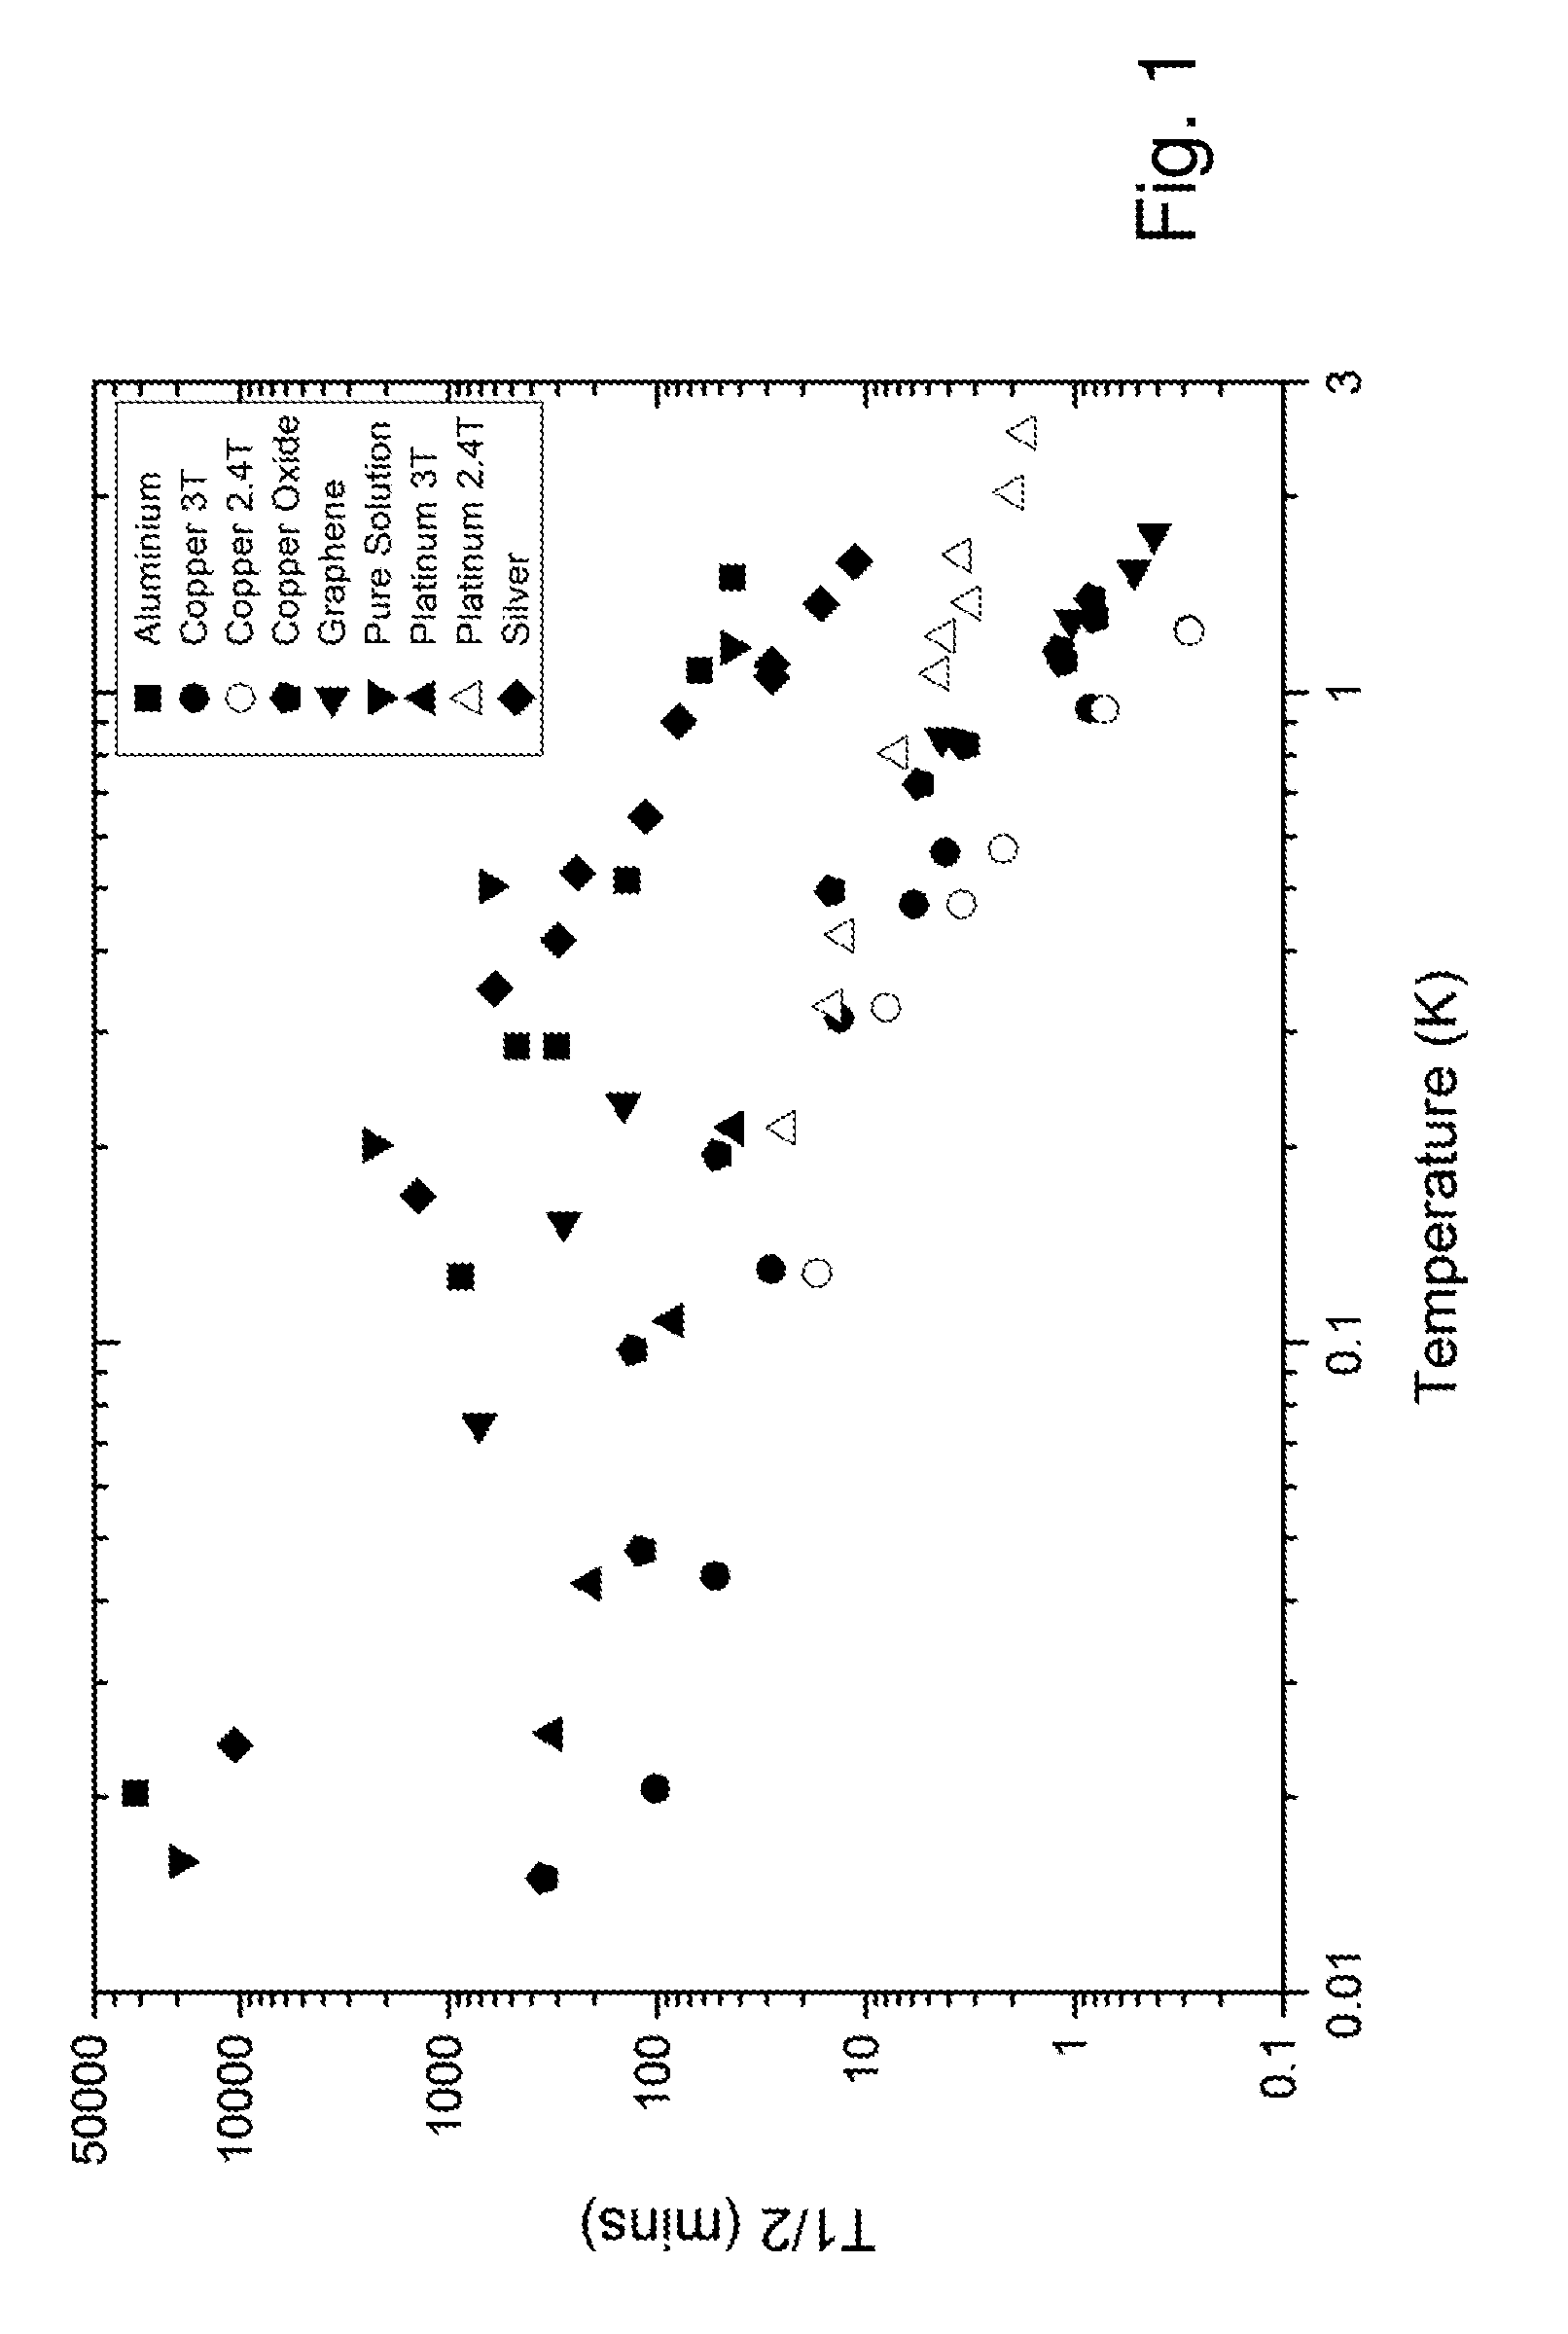 Method of hyperpolarization applying brute force using particulate acceleration agents